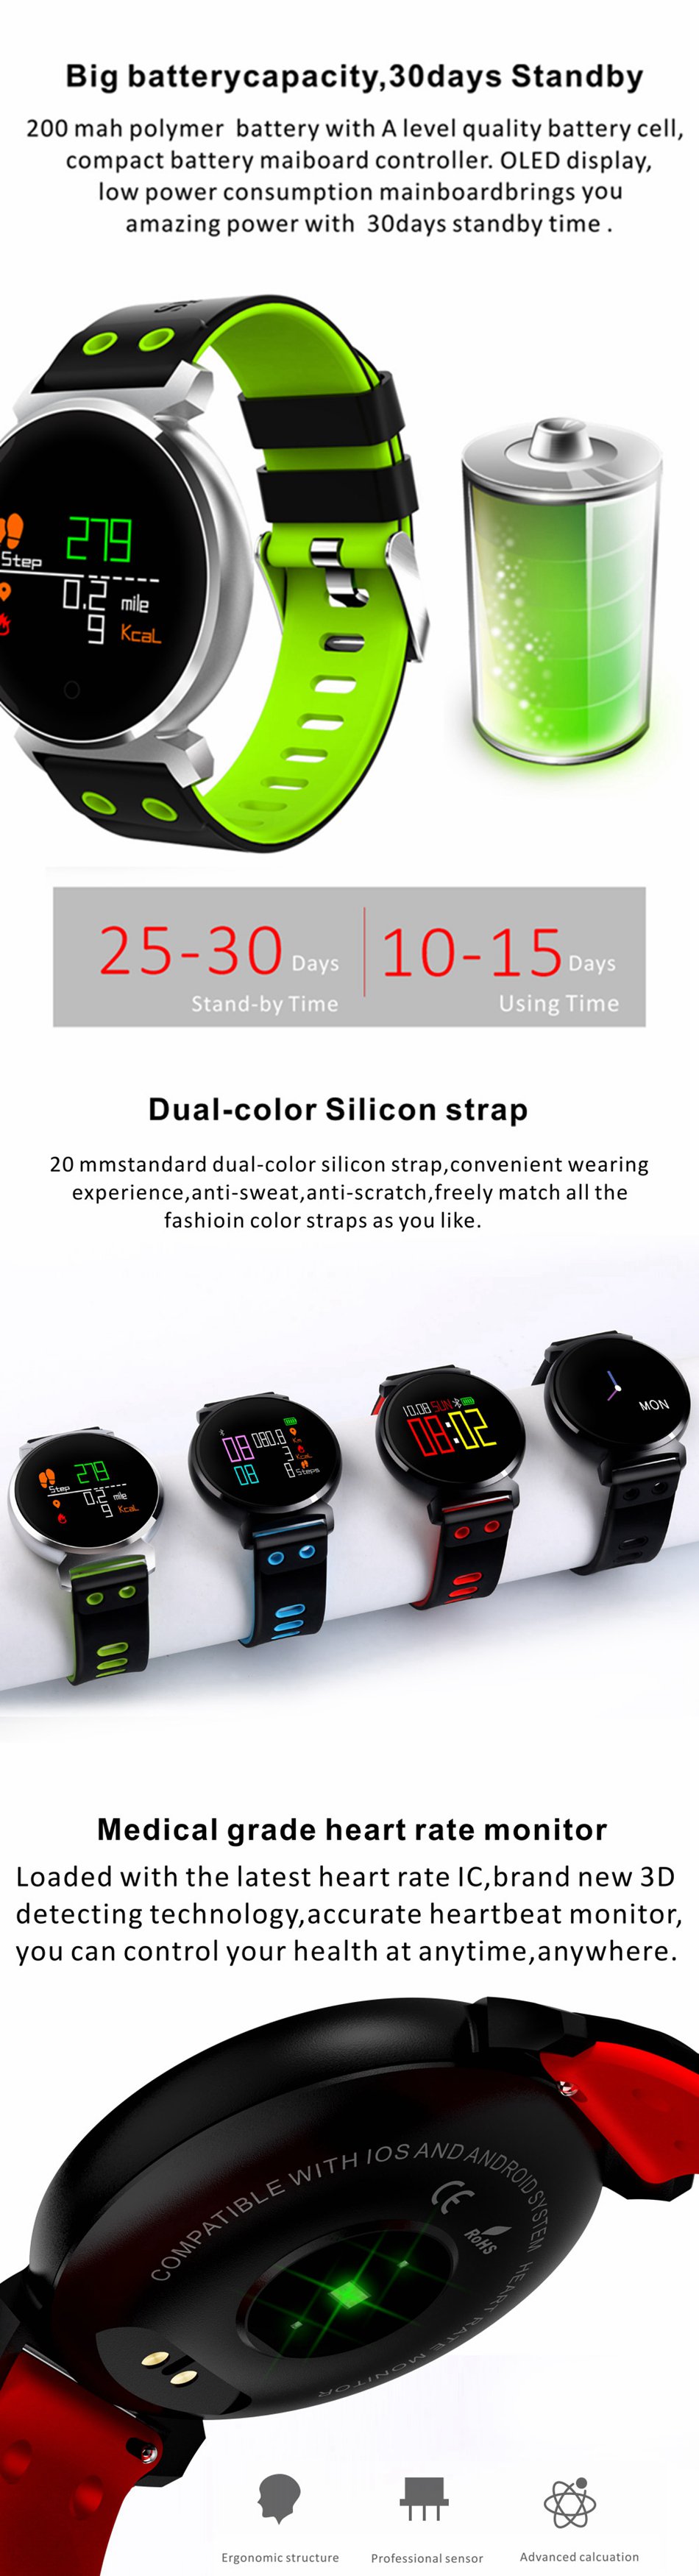 Bakeey-K2-OLED-HD-Color-Display-Swimming-Long-Stand-by-Time-Blood-Pressure-Blood-Oxygen-Monitor-Smar-1230512